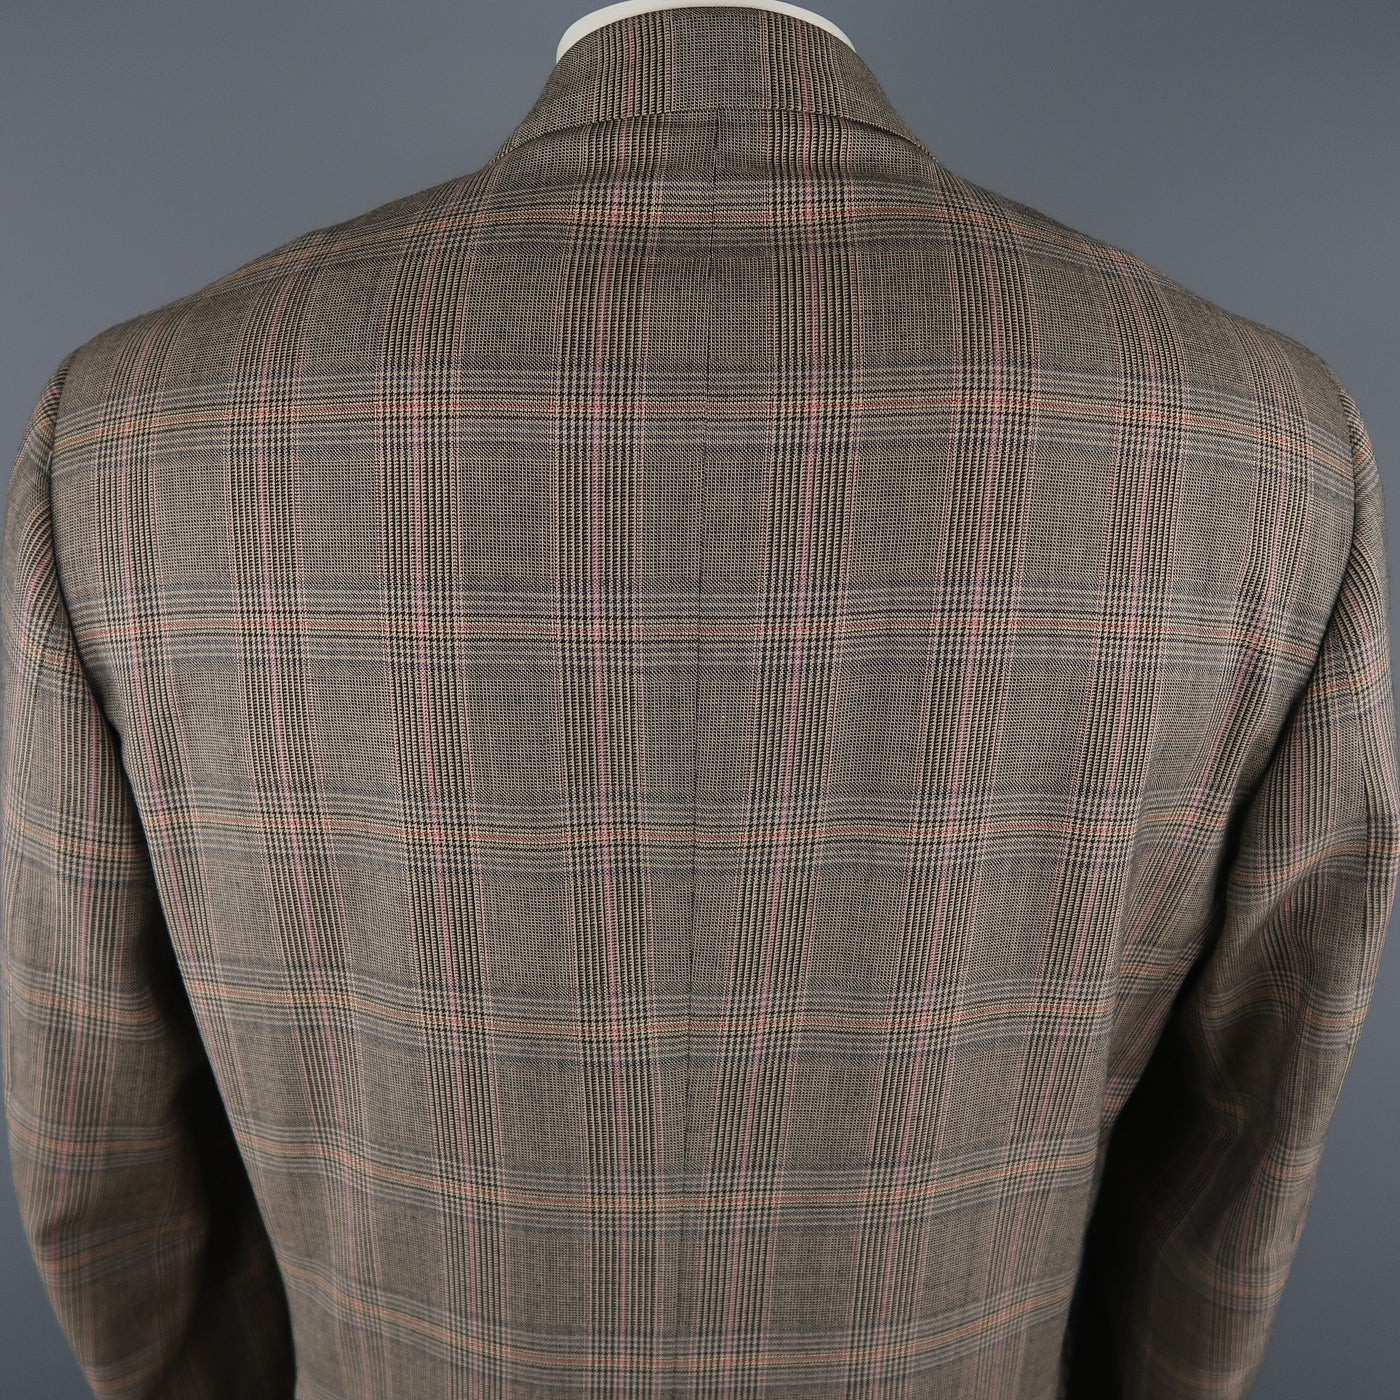 ISAIA Chest Size 46 Long Brown Plaid Wool Notch Lapel Sport Coat